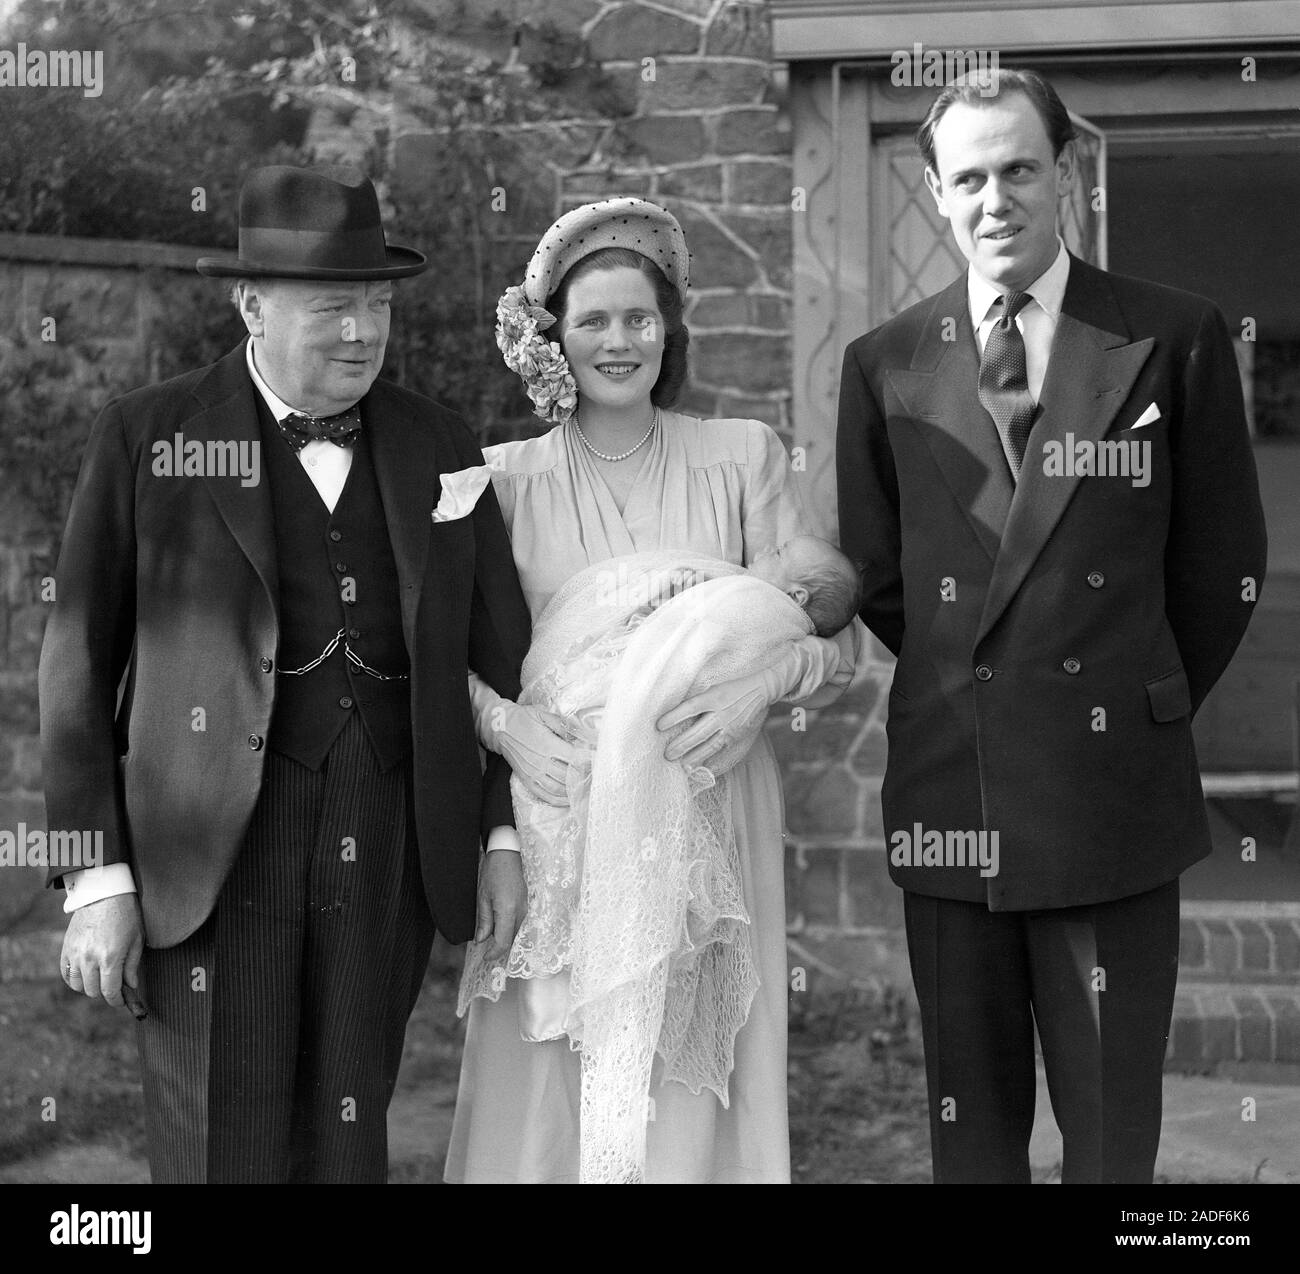 Captain Christopher Soames (r) alongside Winston Churchill (l) and Mary Soames with their newly-christened Arthur Nicholas Winston Soames at the christening party which followed the service at Westminster. Stock Photo